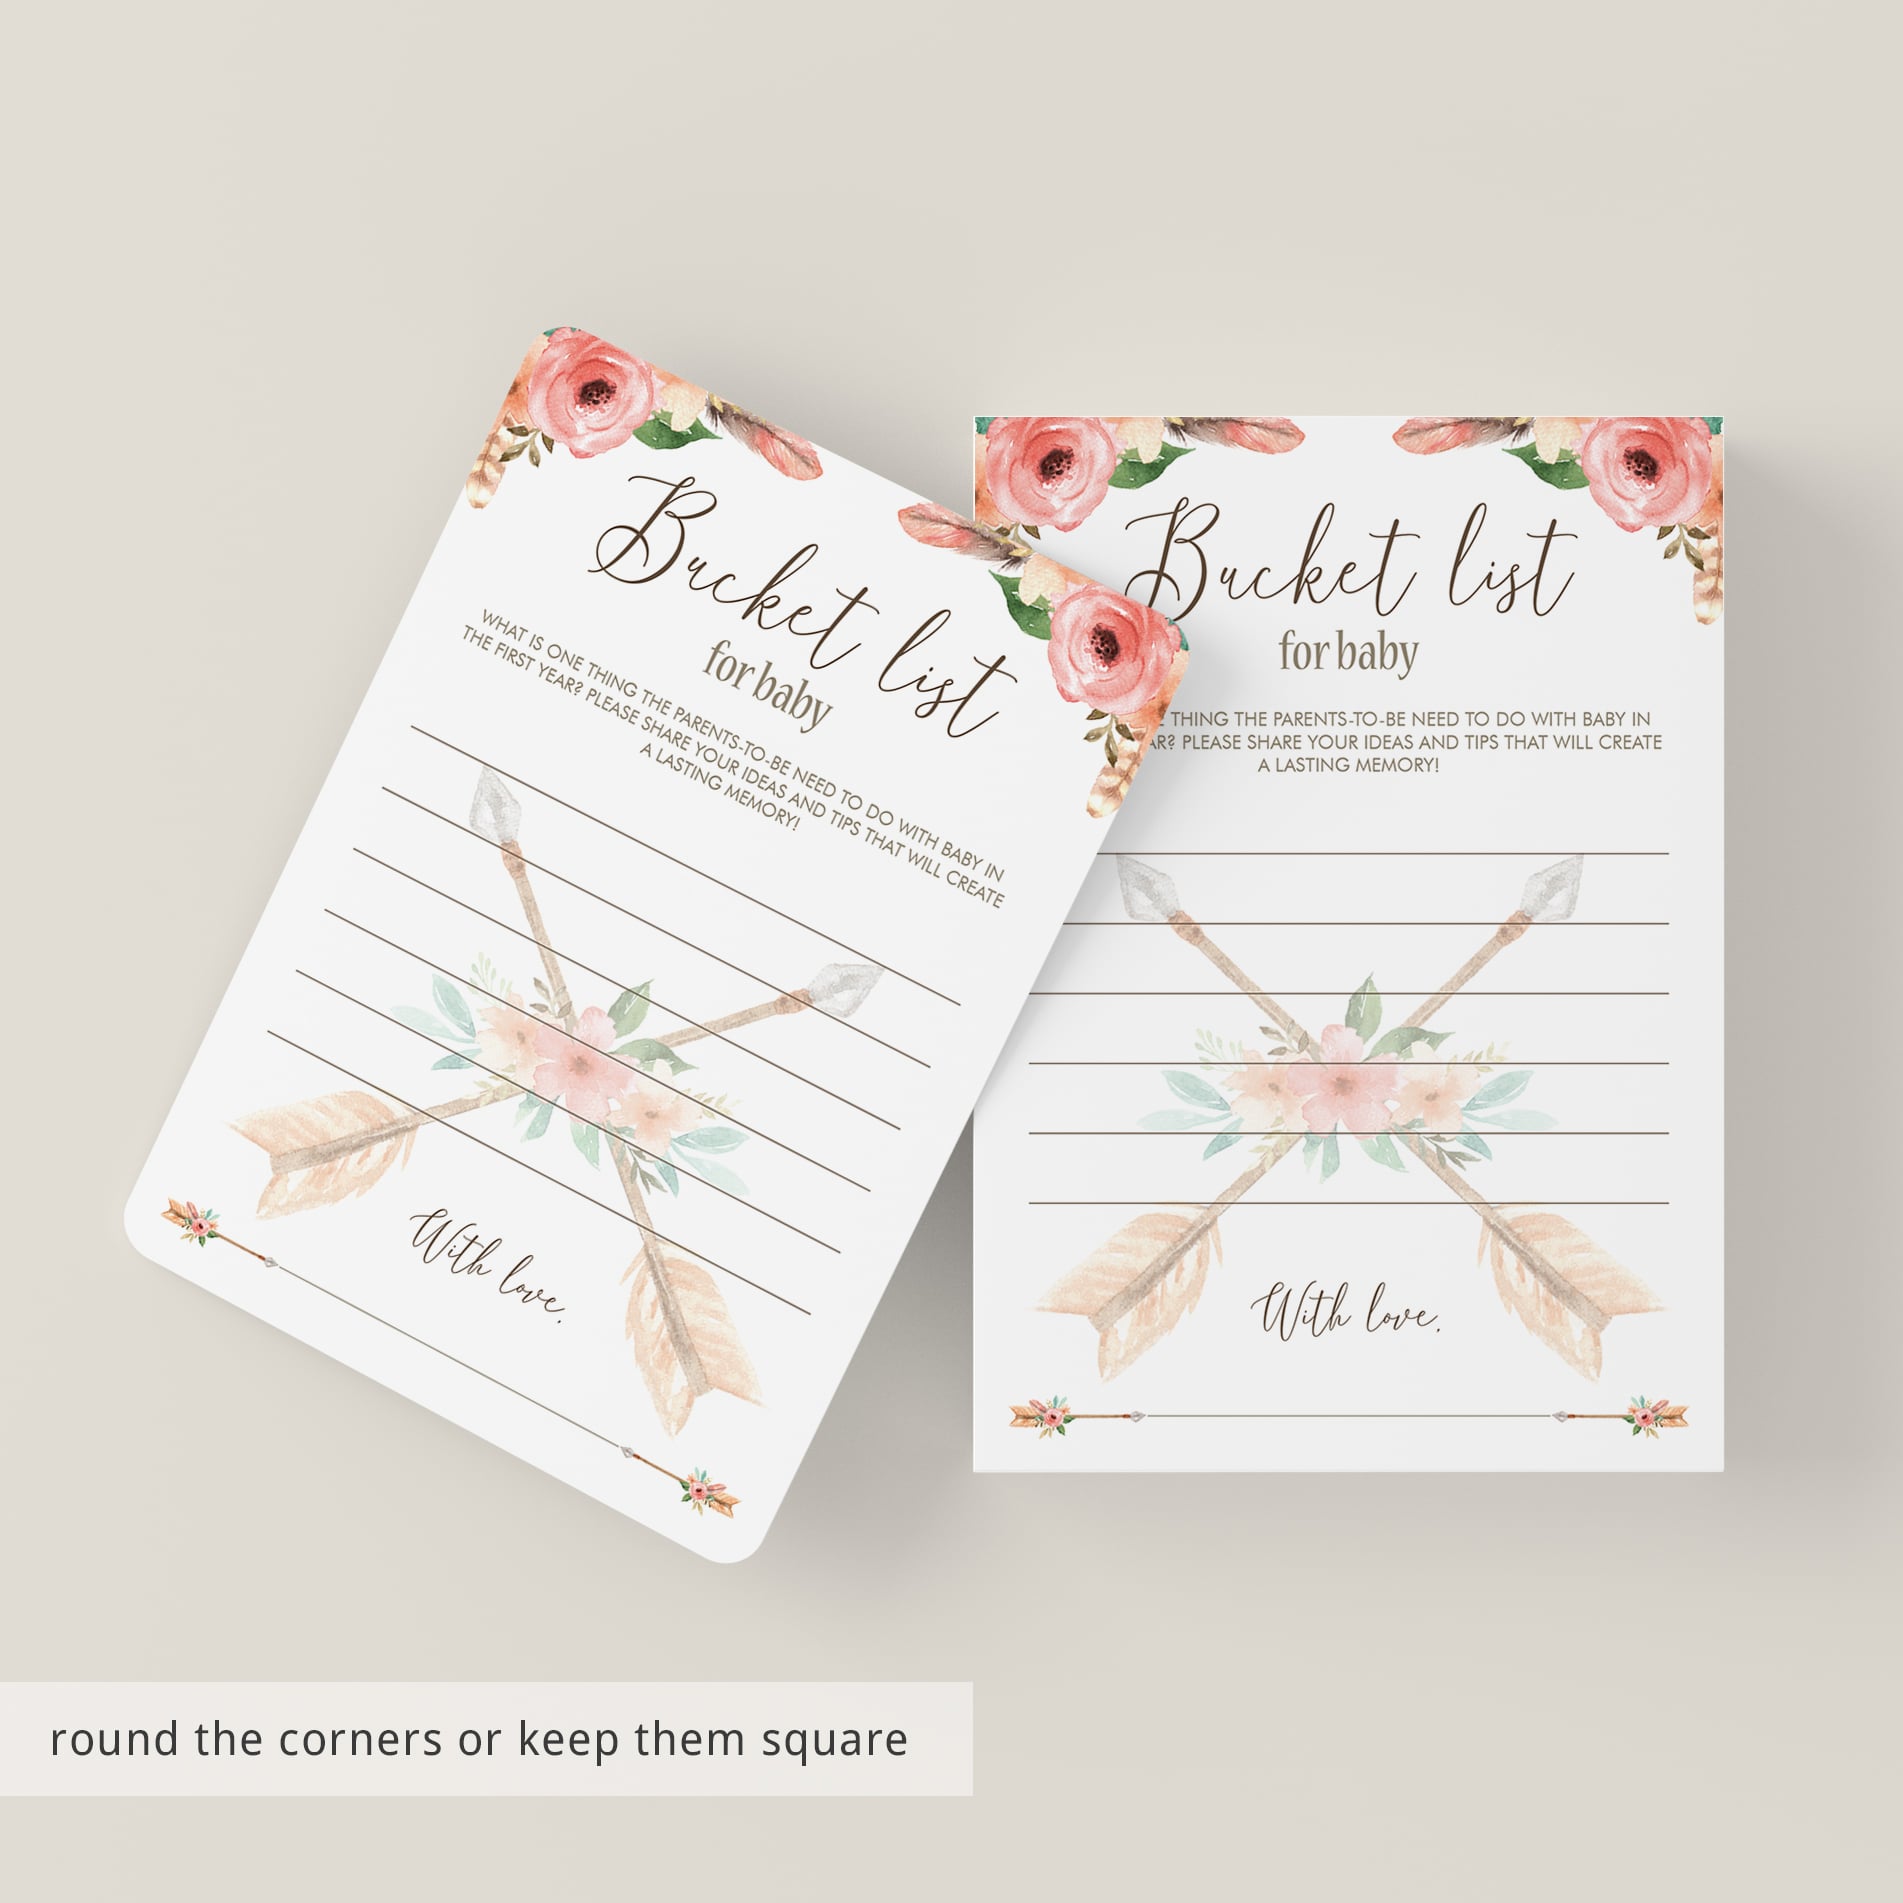 Tribal baby shower ideas printable by LittleSizzle